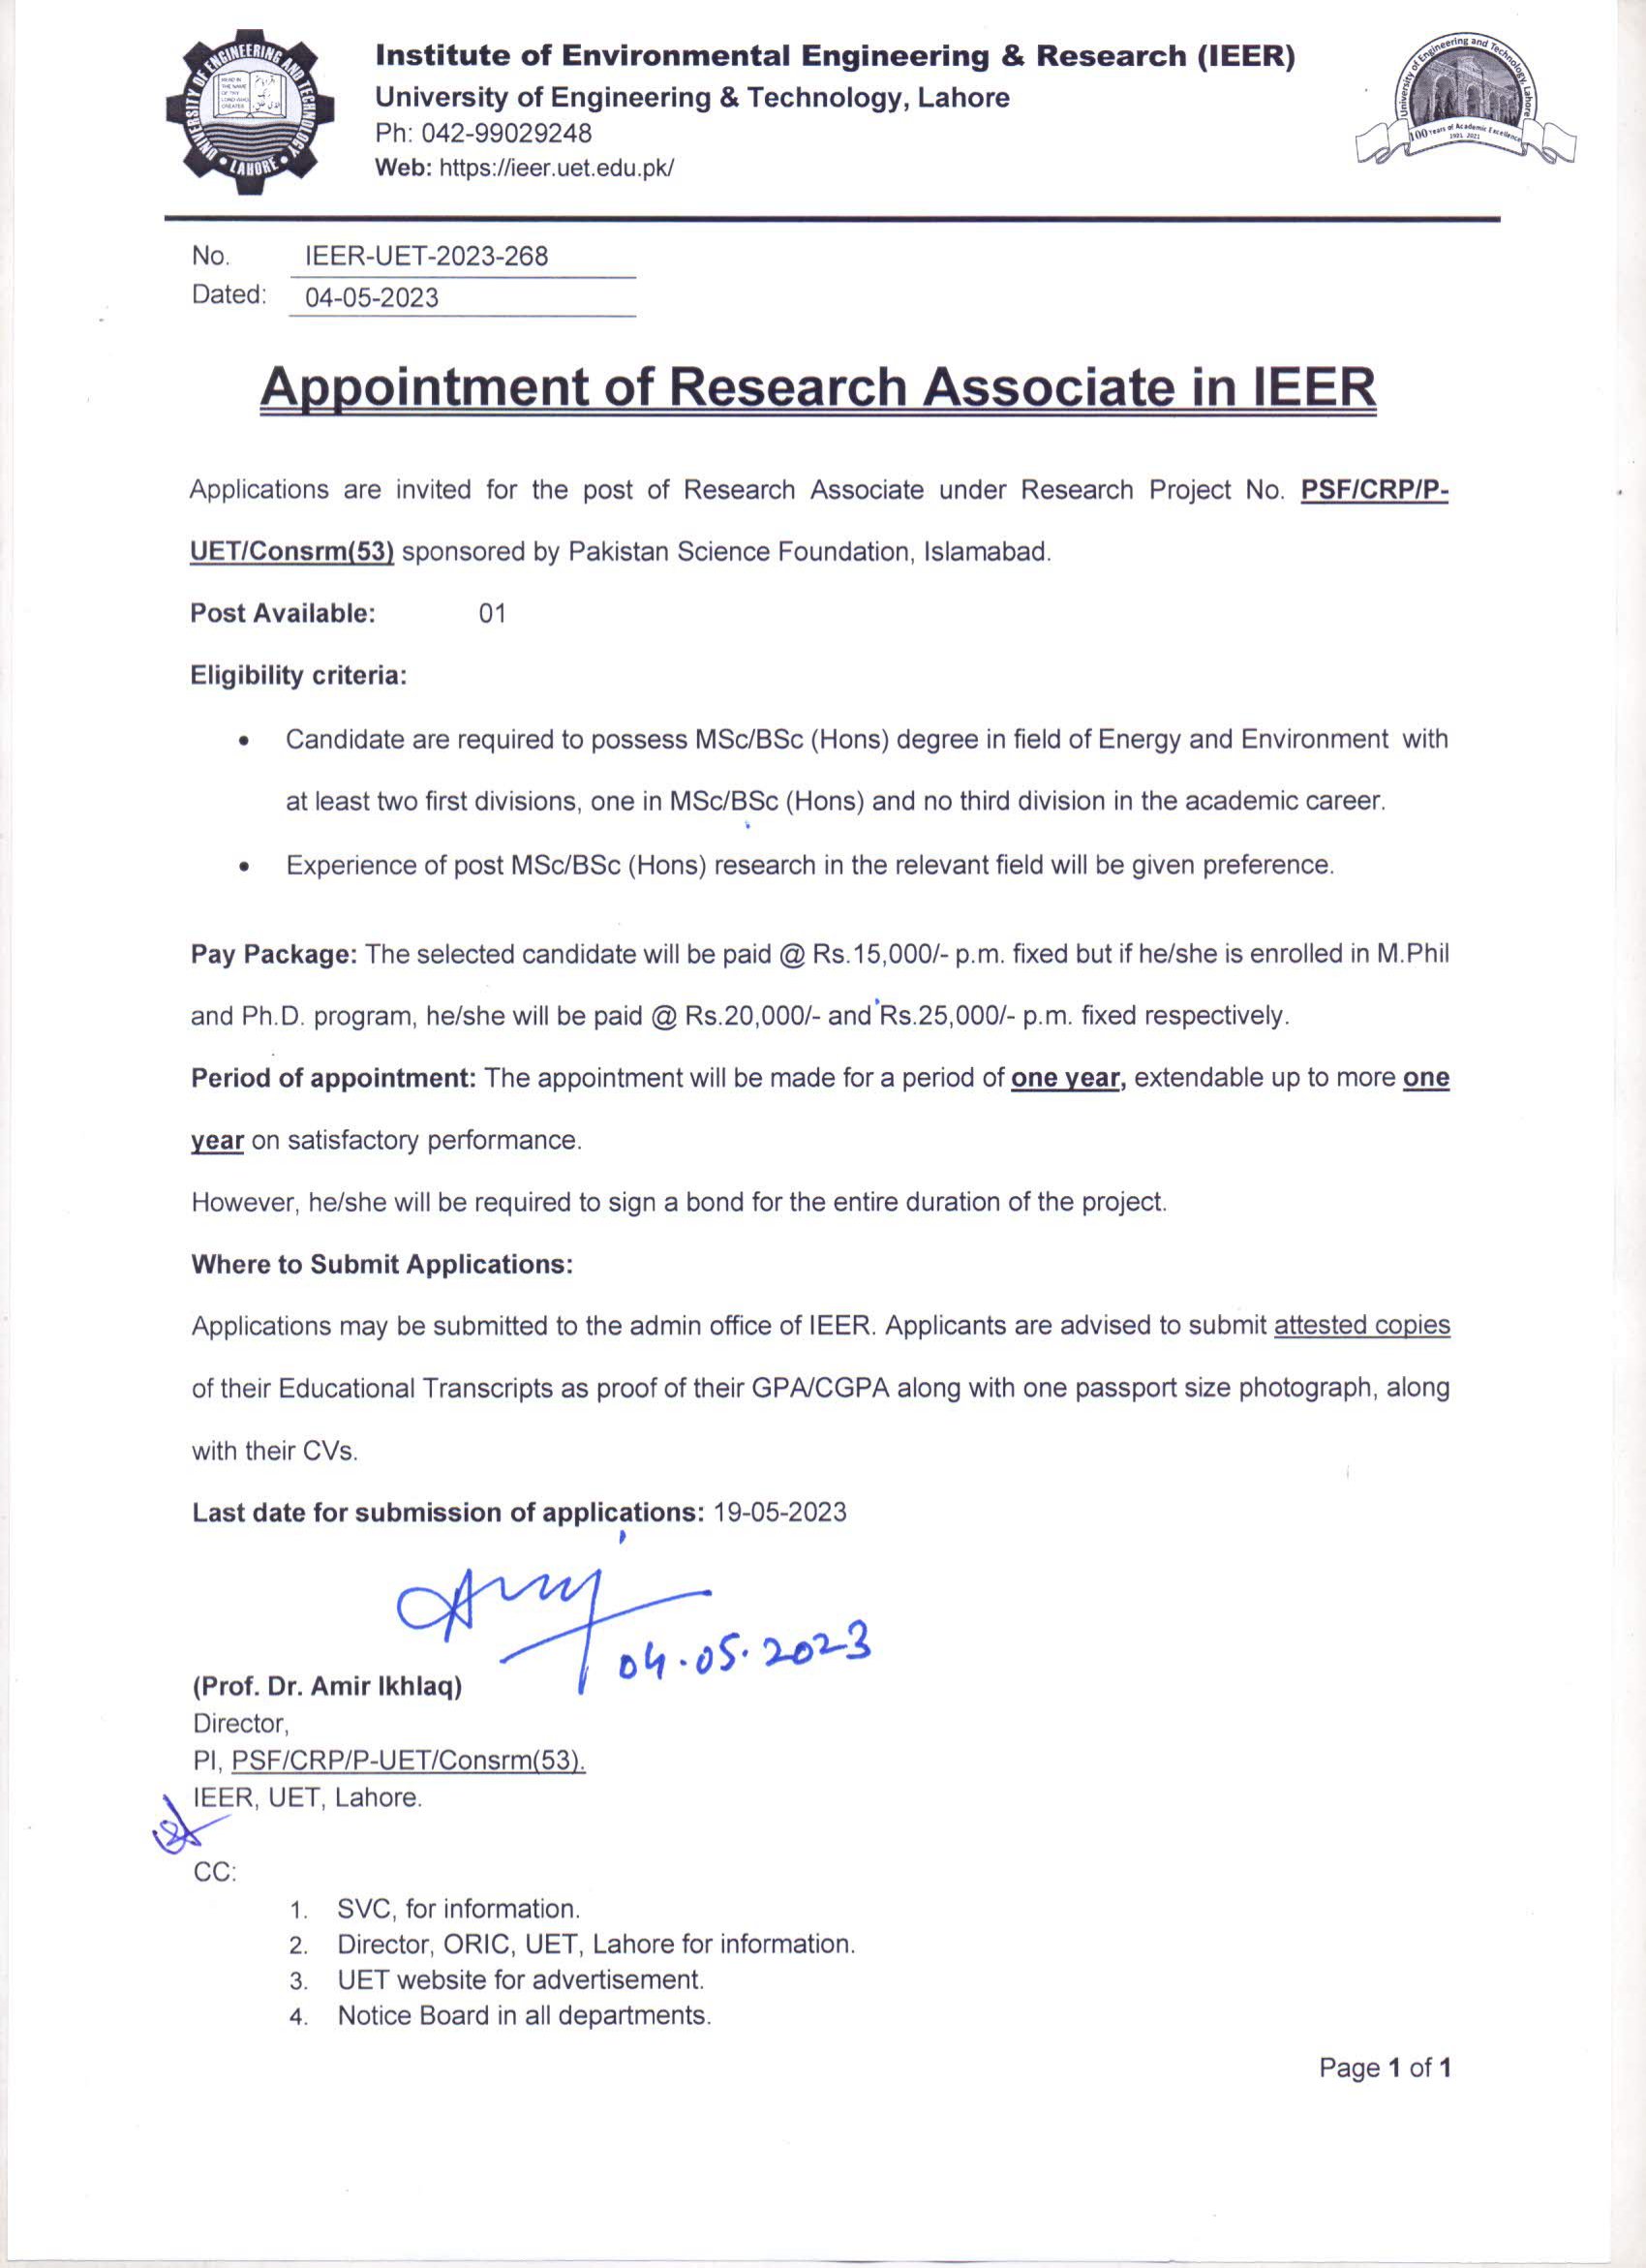 2023-05-04-_Appointment_of_Research_Associate_xRAx_in_IEER